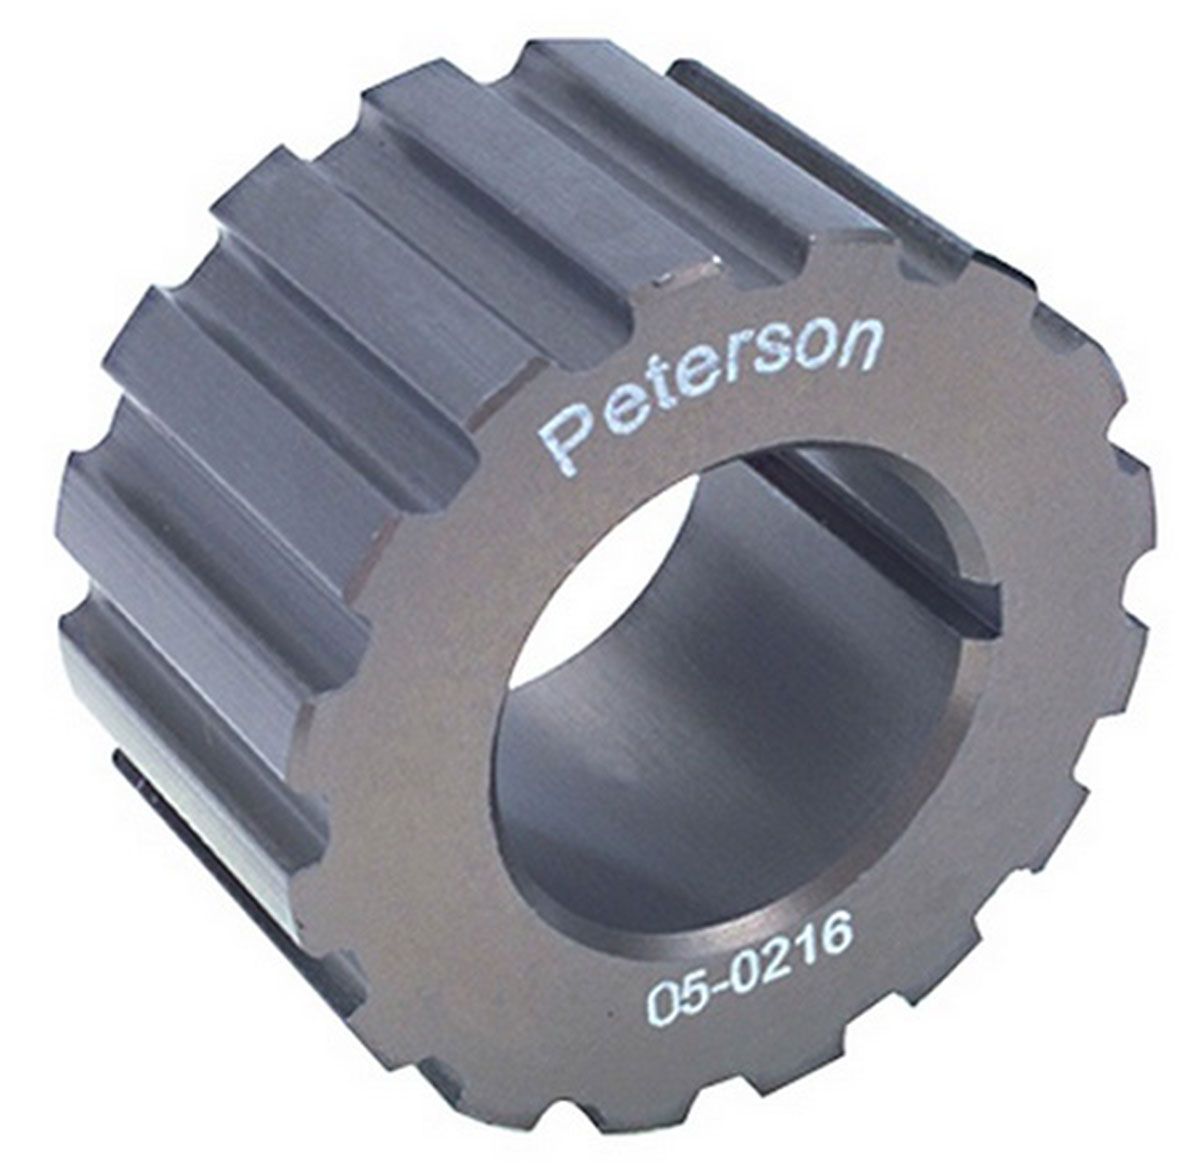 PFS05-0224 - CRANK / GILMER PULLEY 24 TOOTH